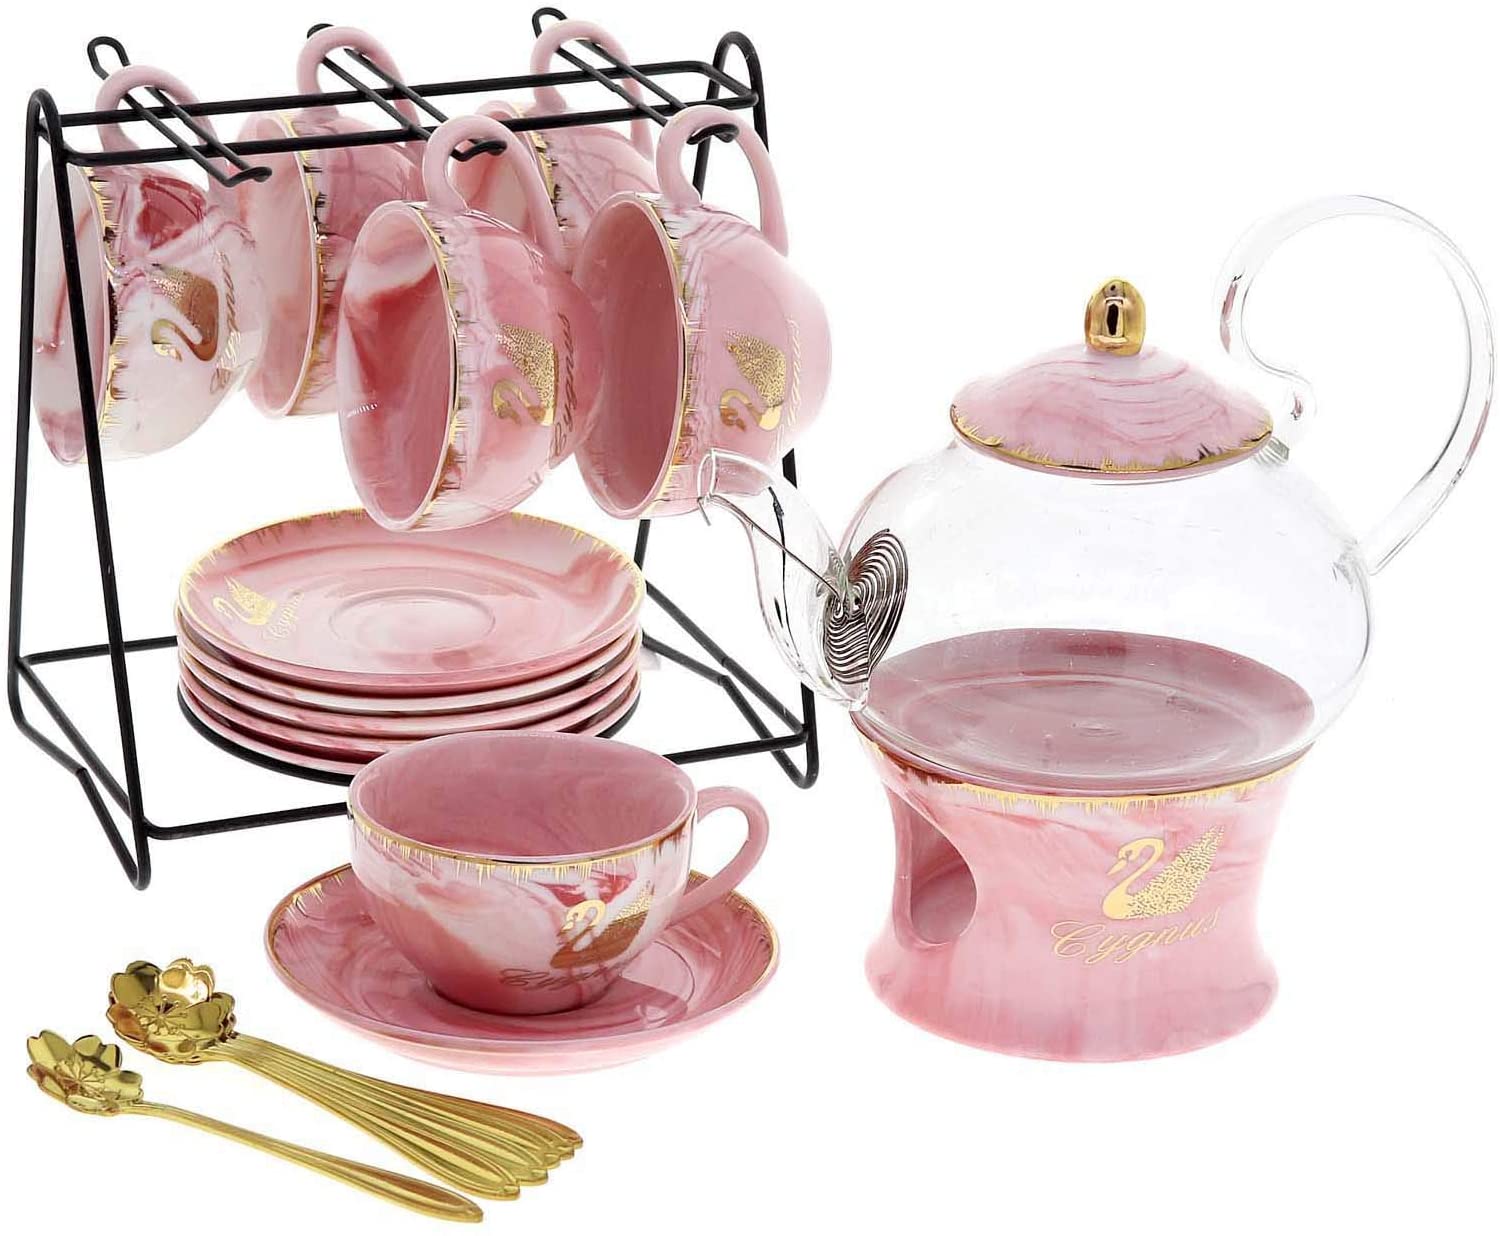 22-Piece Porcelain Ceramic Coffee & Tea Gift Sets, Cups & Saucer Service for 6 - Pink